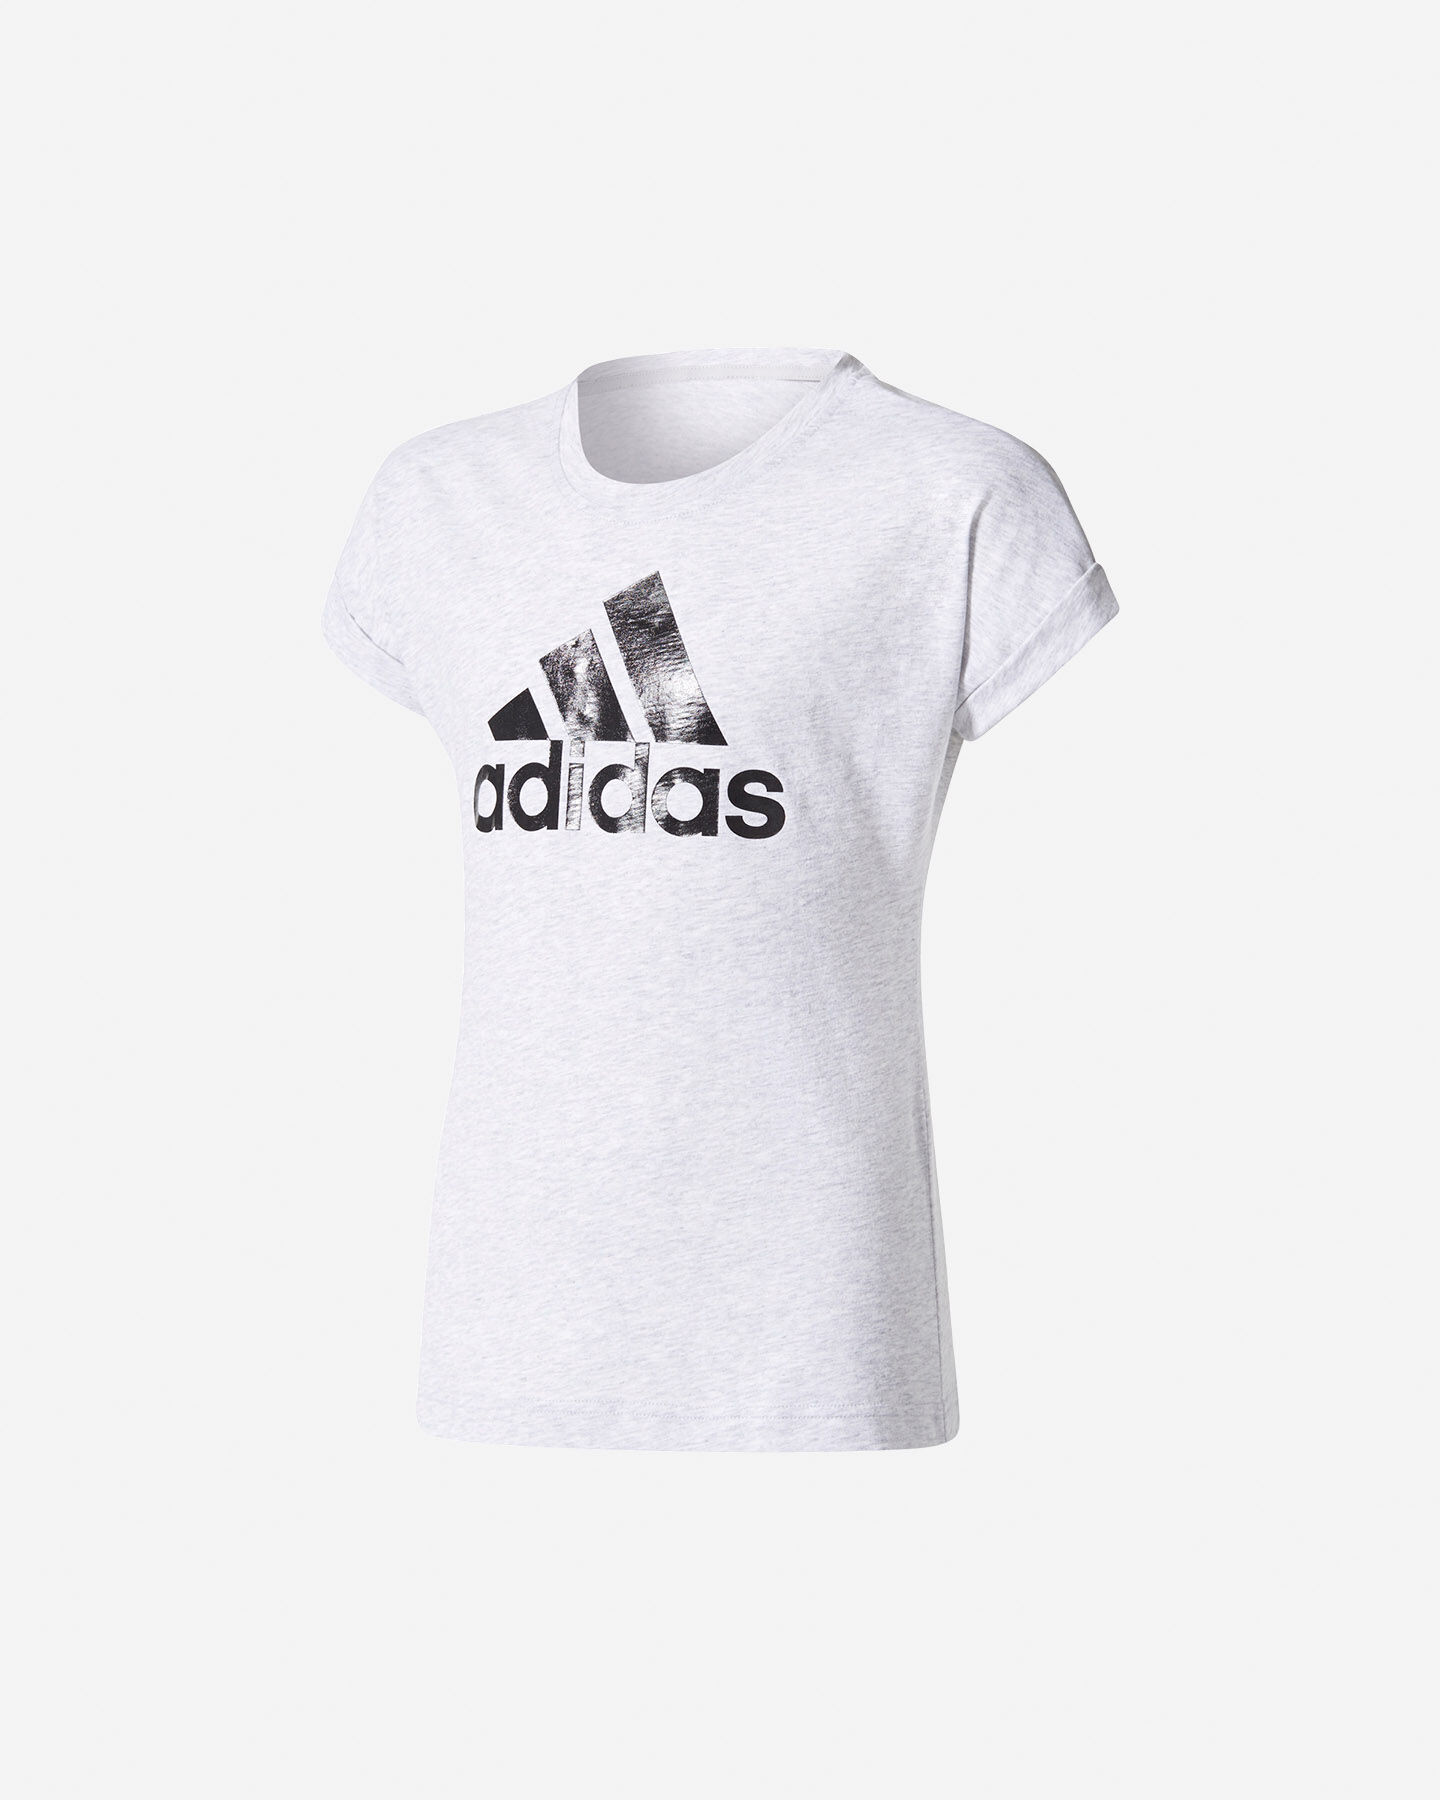 maglie adidas low cost